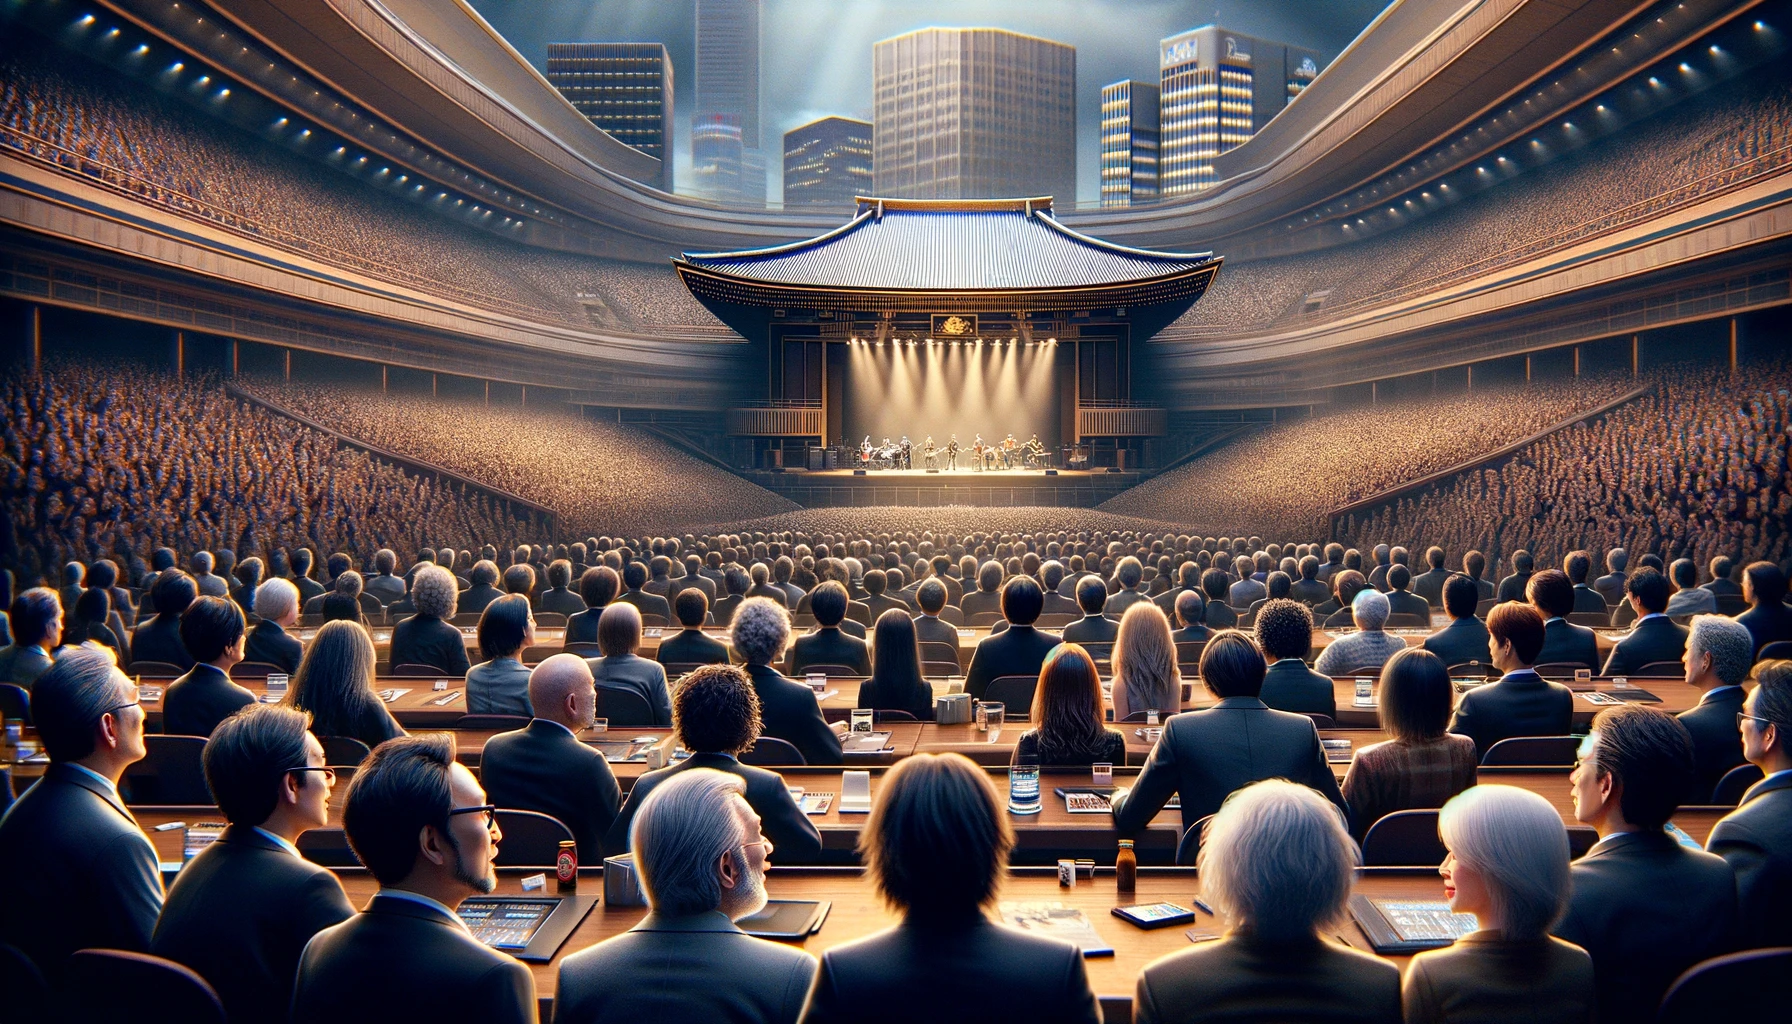 A powerful image illustrating the significance of a live concert at the Budokan arena in Tokyo, Japan within the music industry. The scene shows a variety of influential figures from the music industry, including producers, executives, and artists, all gathered in the audience, attentively watching a performance on stage. The focus is on their expressions of admiration and engagement, emphasizing the importance of this venue as a milestone for any musician's career. The iconic Budokan architecture is visible in the background, symbolizing prestige and success in the music world, depicted in a wide 16:9 format.